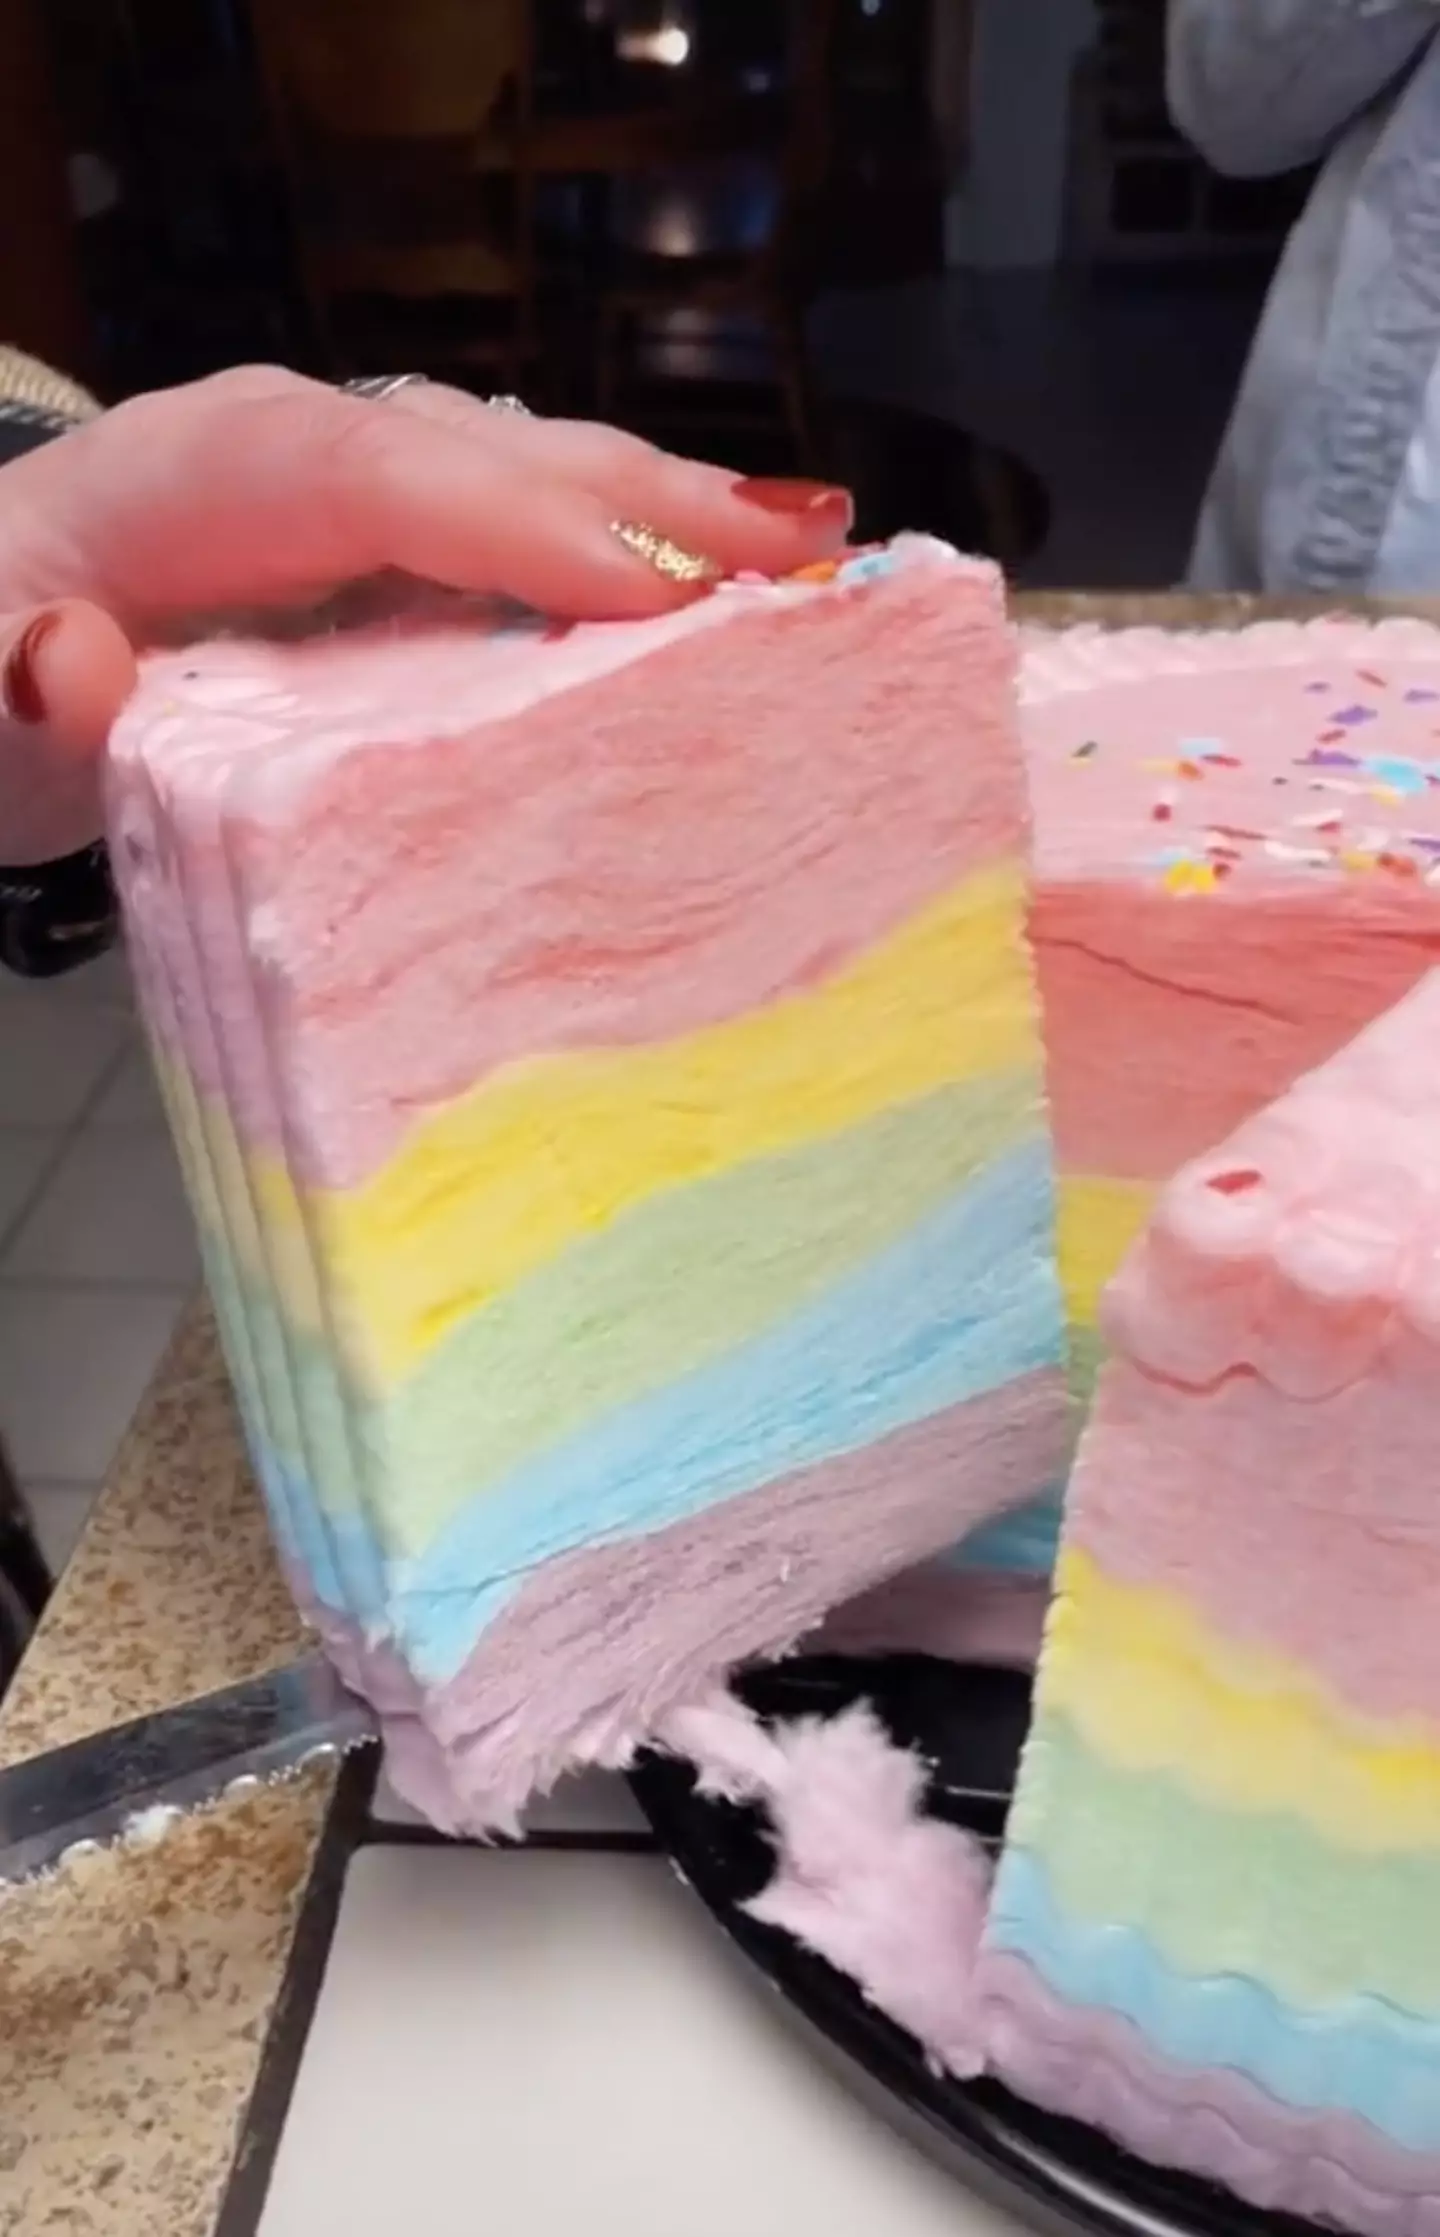 These Cotton Candy cakes don't even need to go in the oven. (